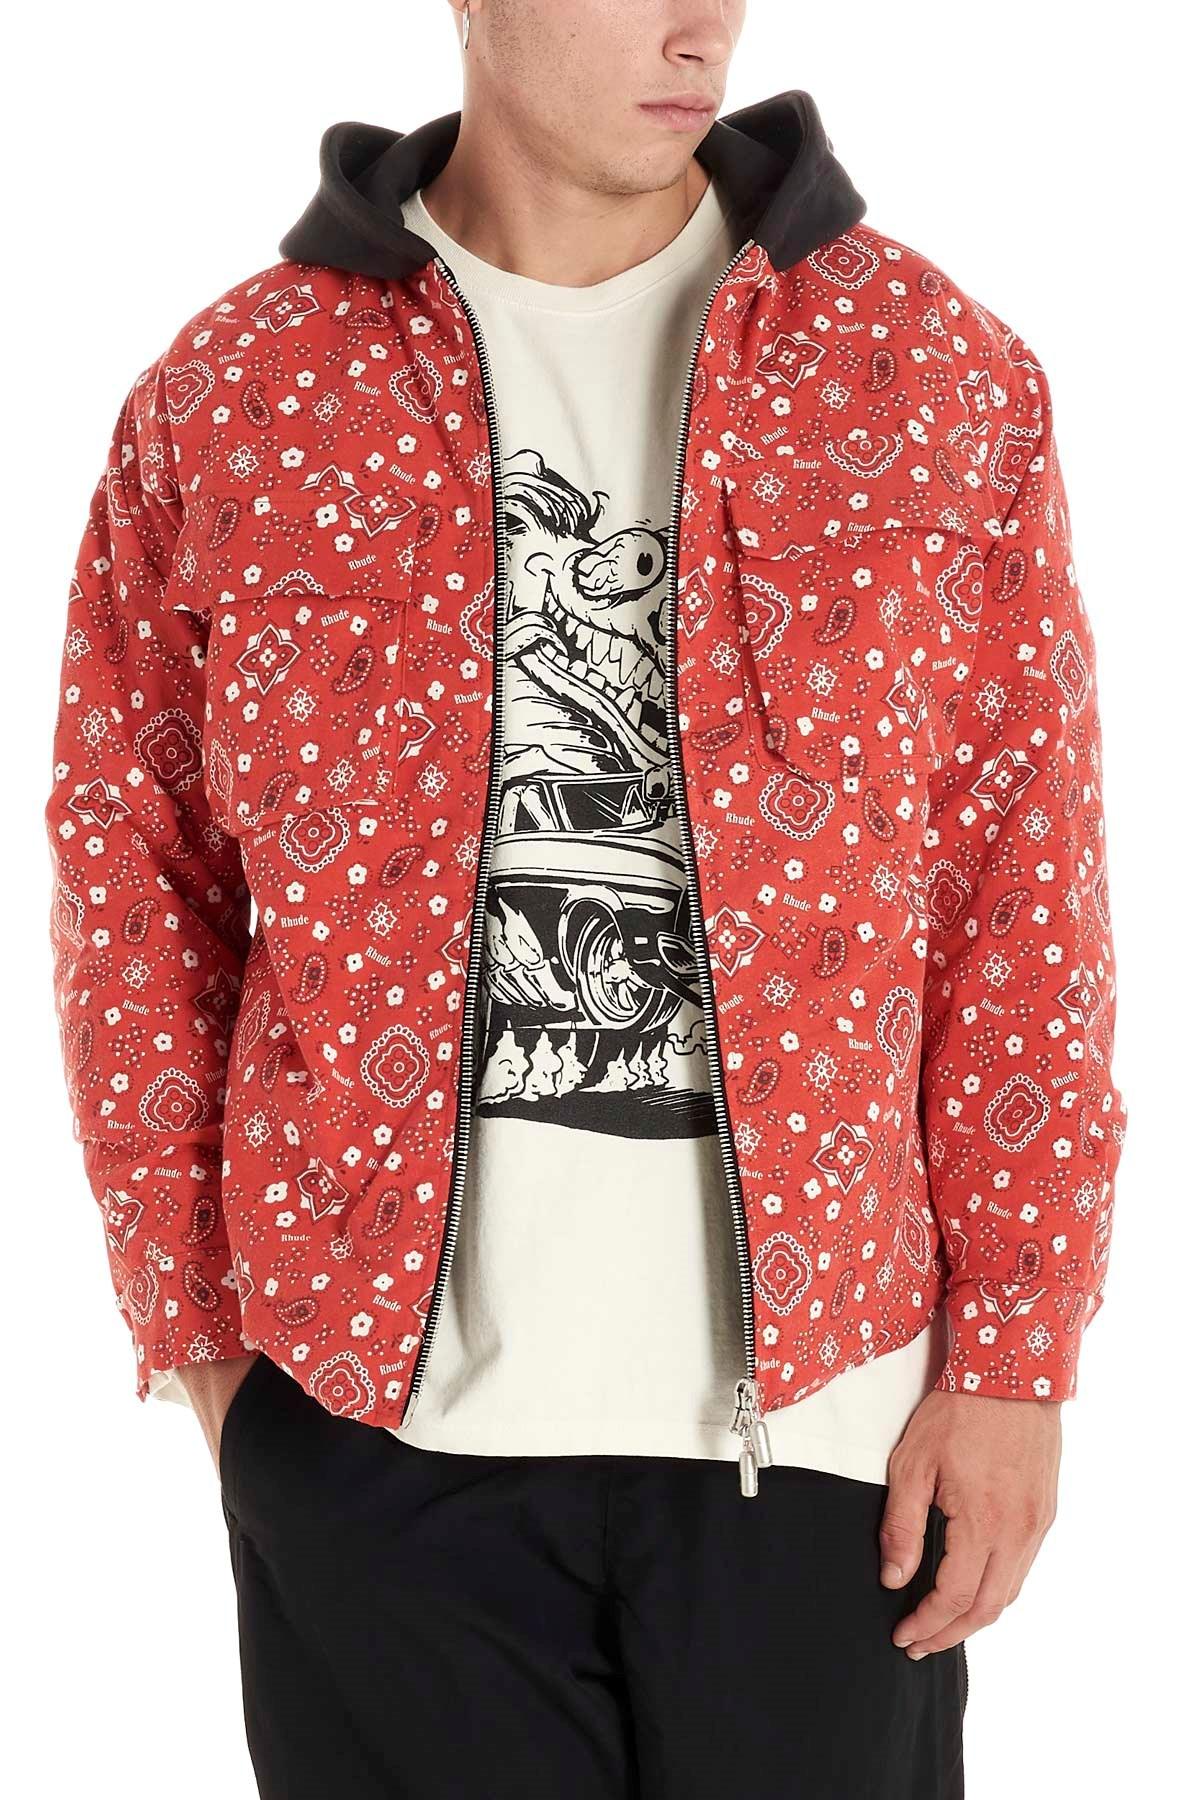 Rhude Cotton Bandana Print Jacket in Red for Men - Lyst